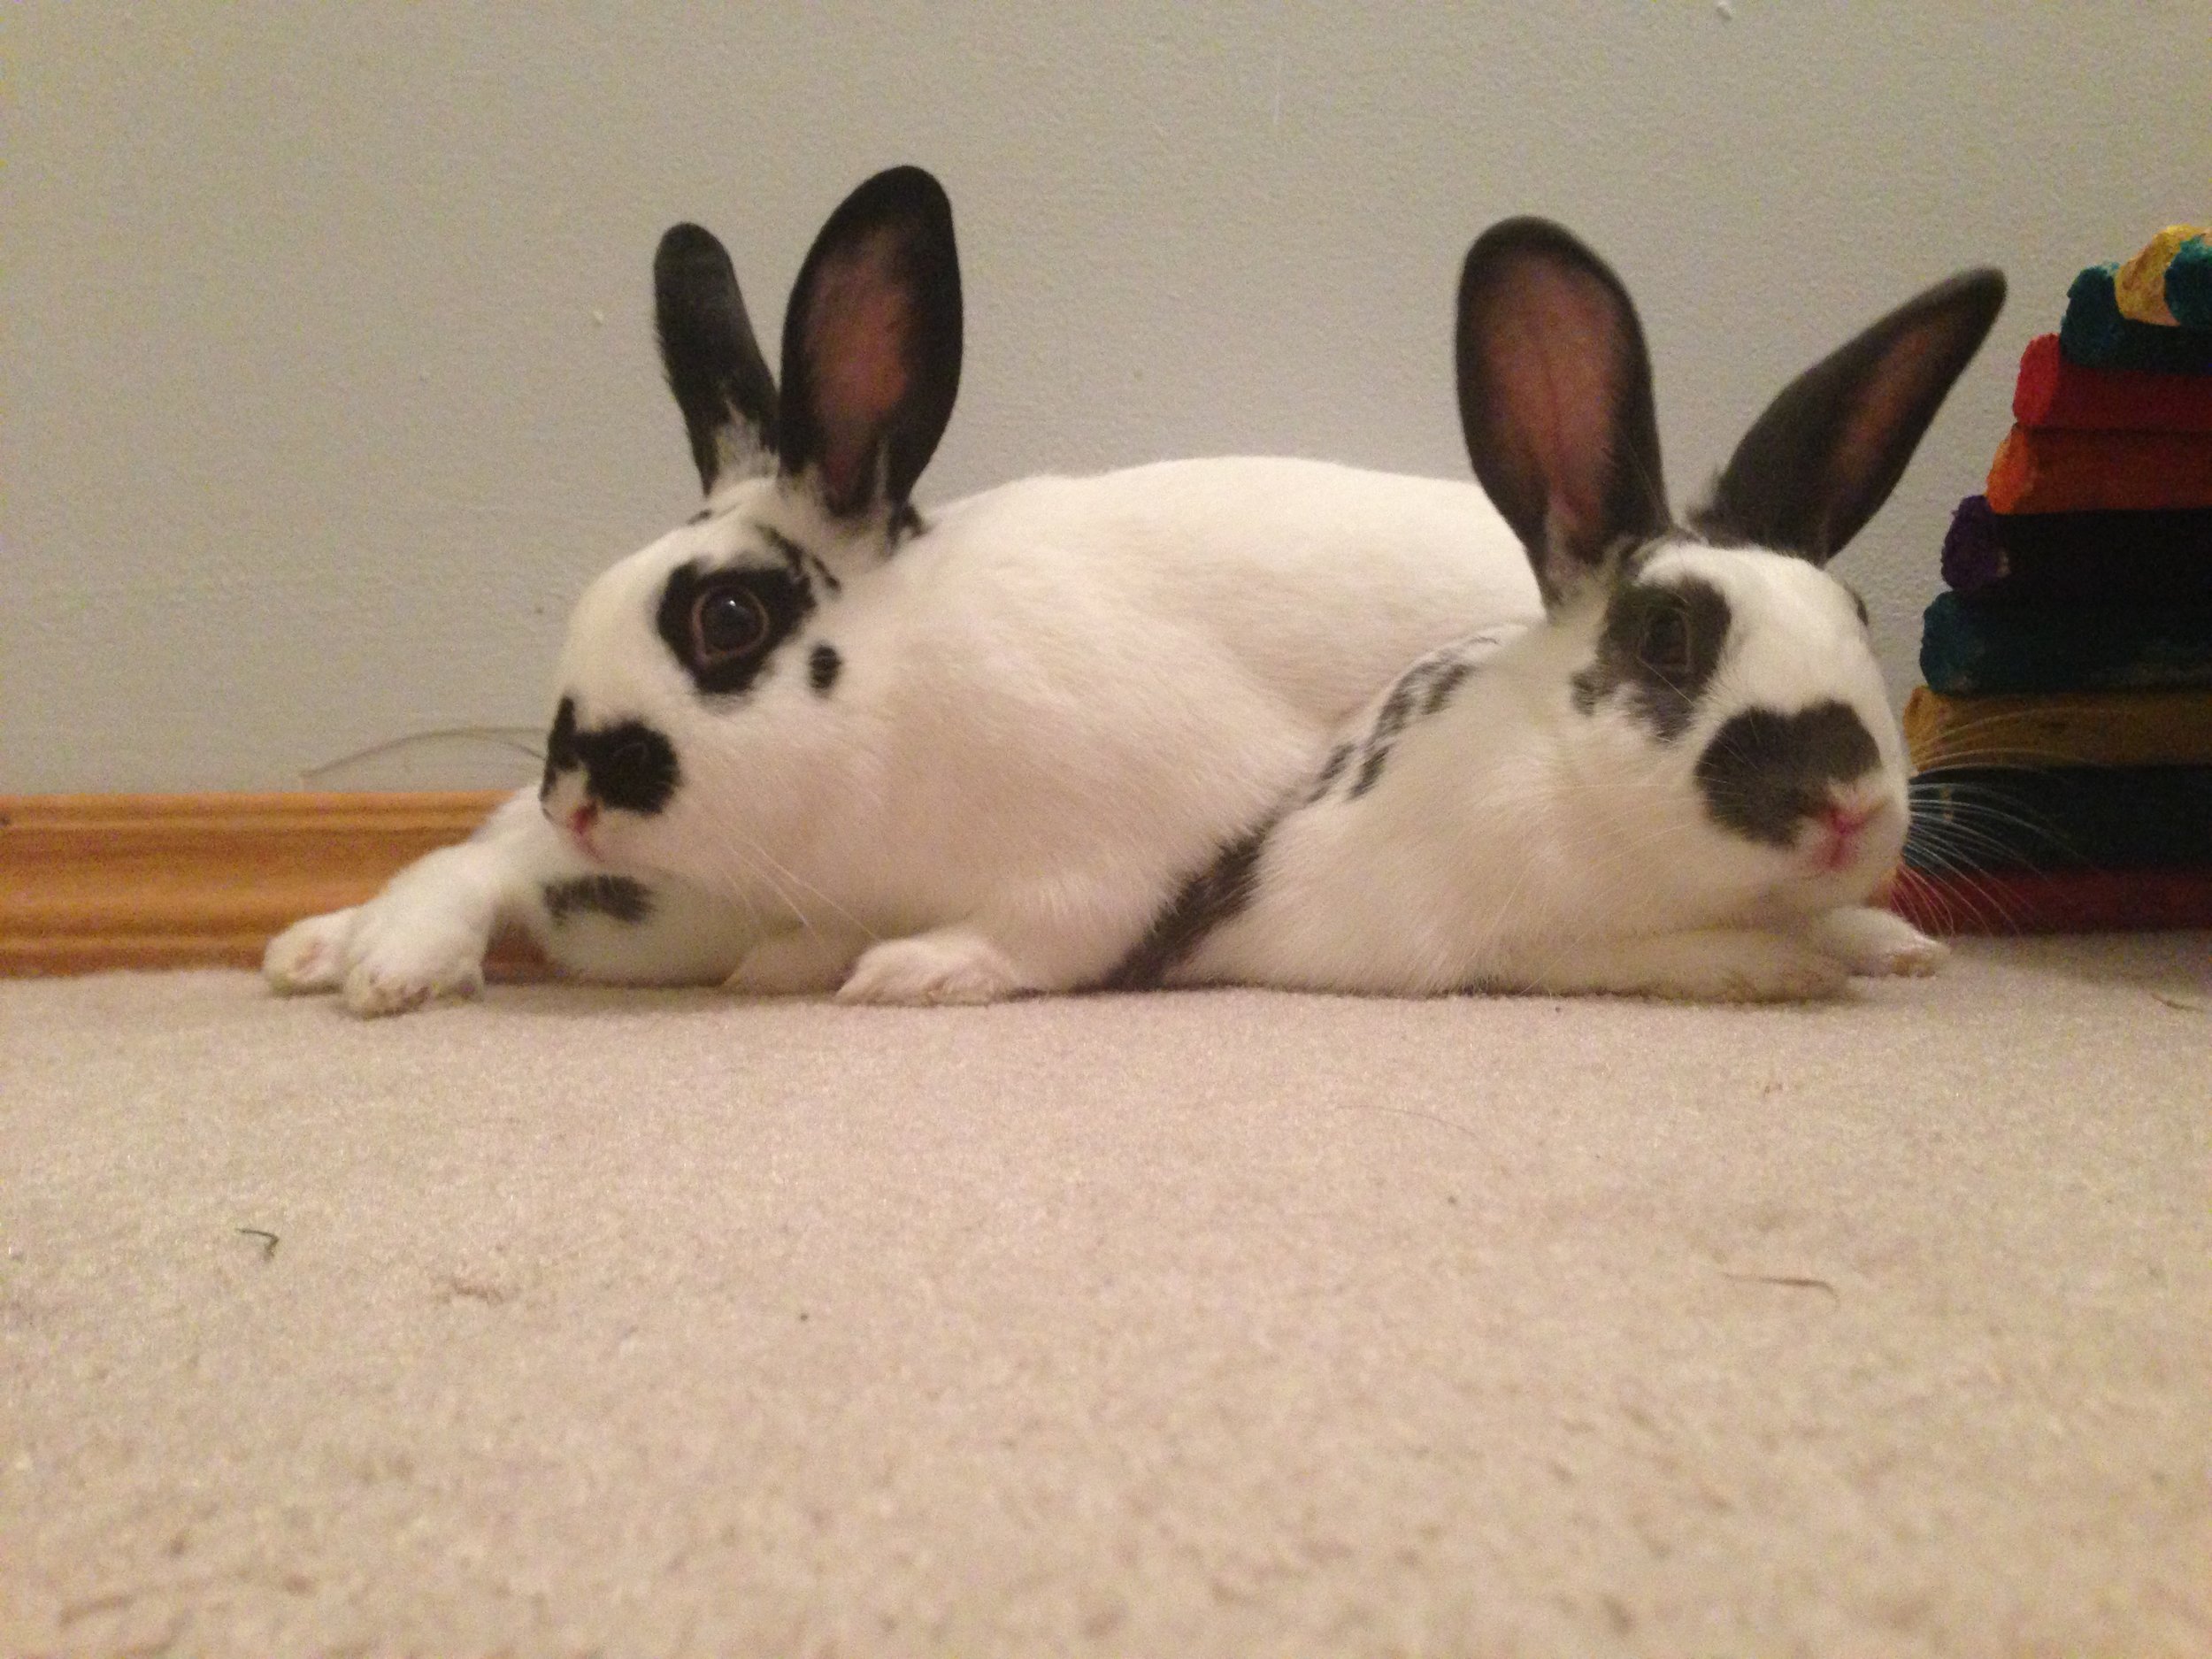 Bunny Protects His Sister from the Noisy Fireworks 1